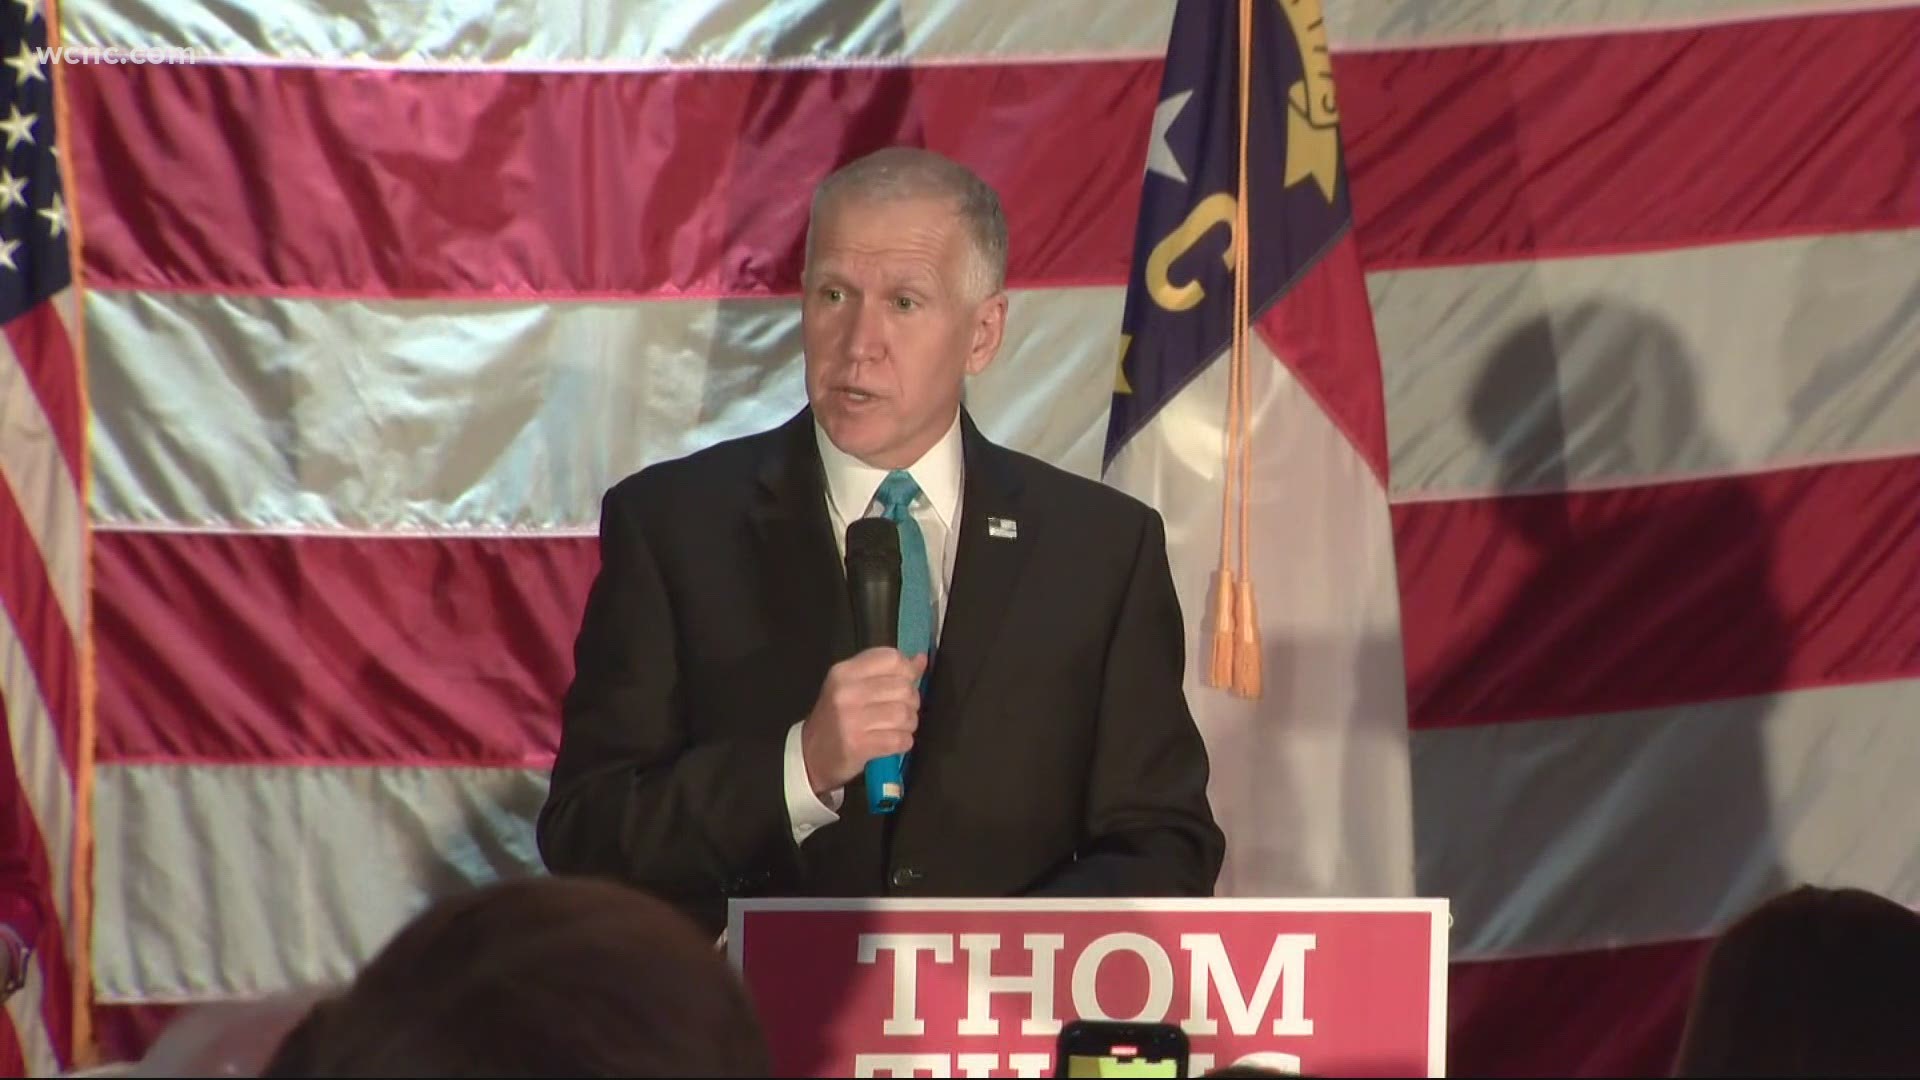 Republican incumbent Thom Tillis declared victory over Democrat Cal Cunningham in an extremely close race for North Carolina's seat in the US Senate.